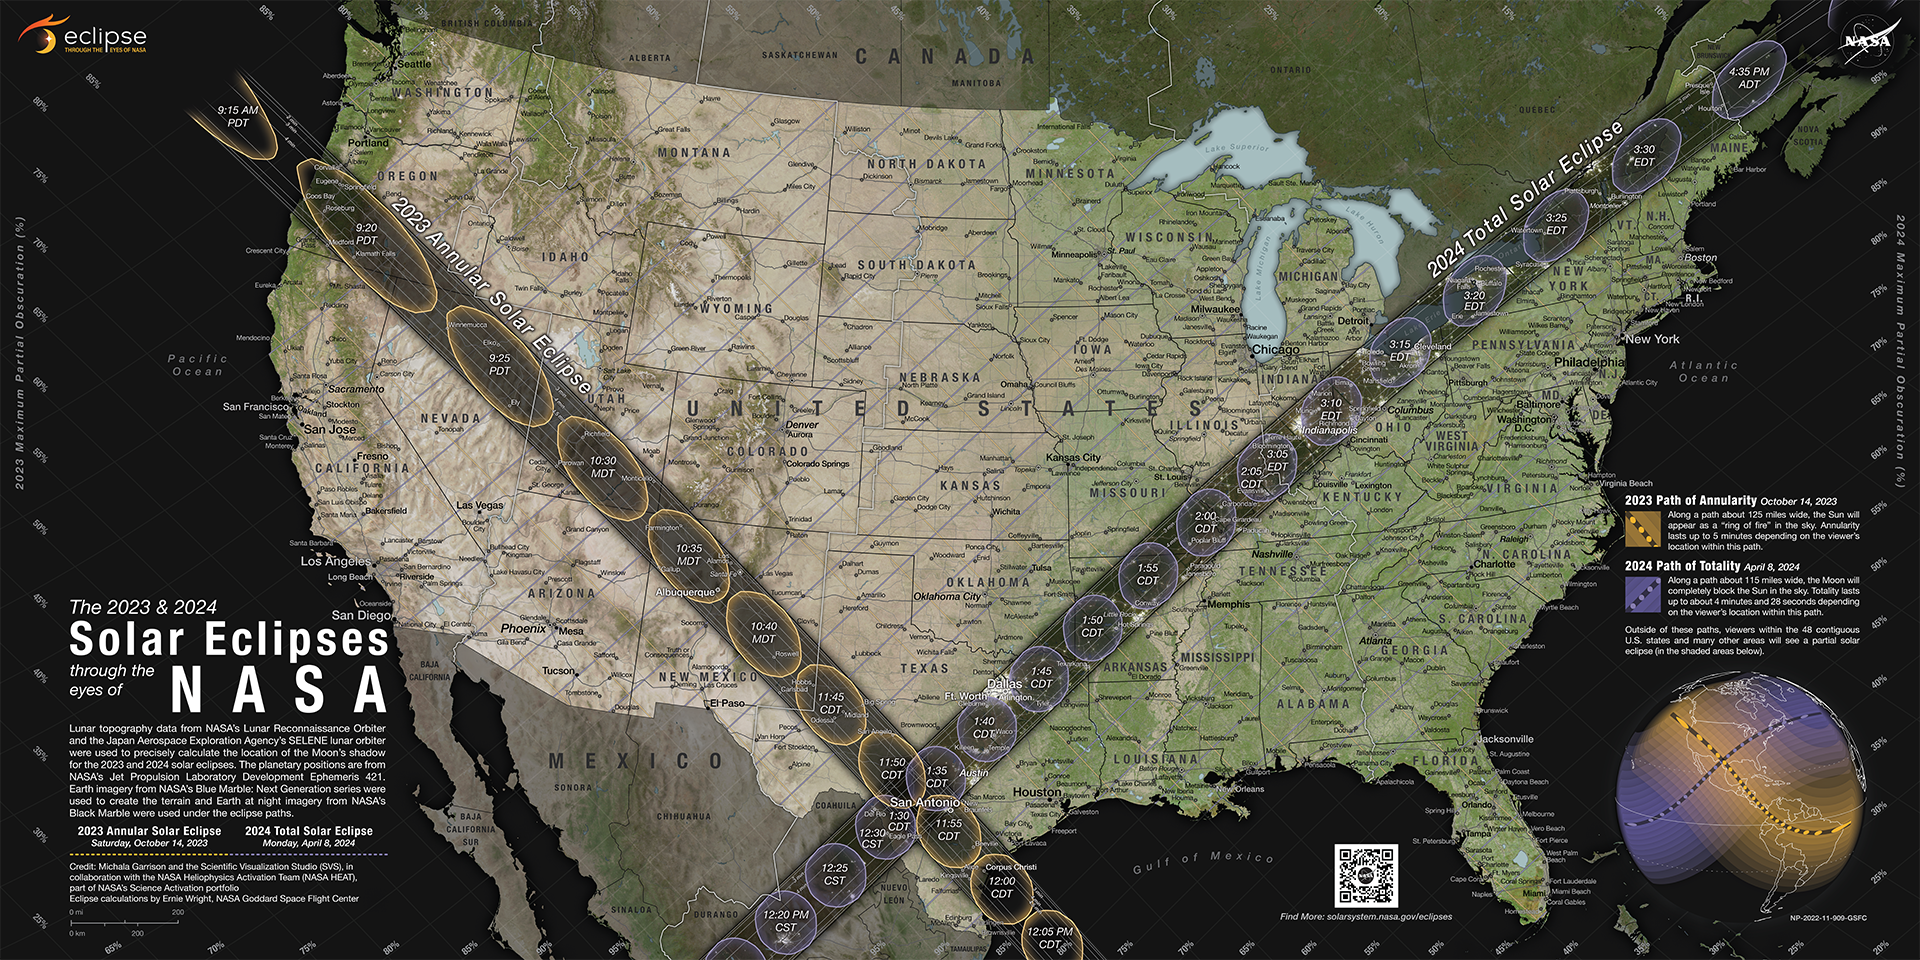 A map shows the 48 contiguous U.S. states with two dark bands running across it. One band, labeled Annular Solar Eclipse, crosses states from Oregon to Texas. The other band, labeled Total Solar Eclipse, crosses states from Texas to Maine."